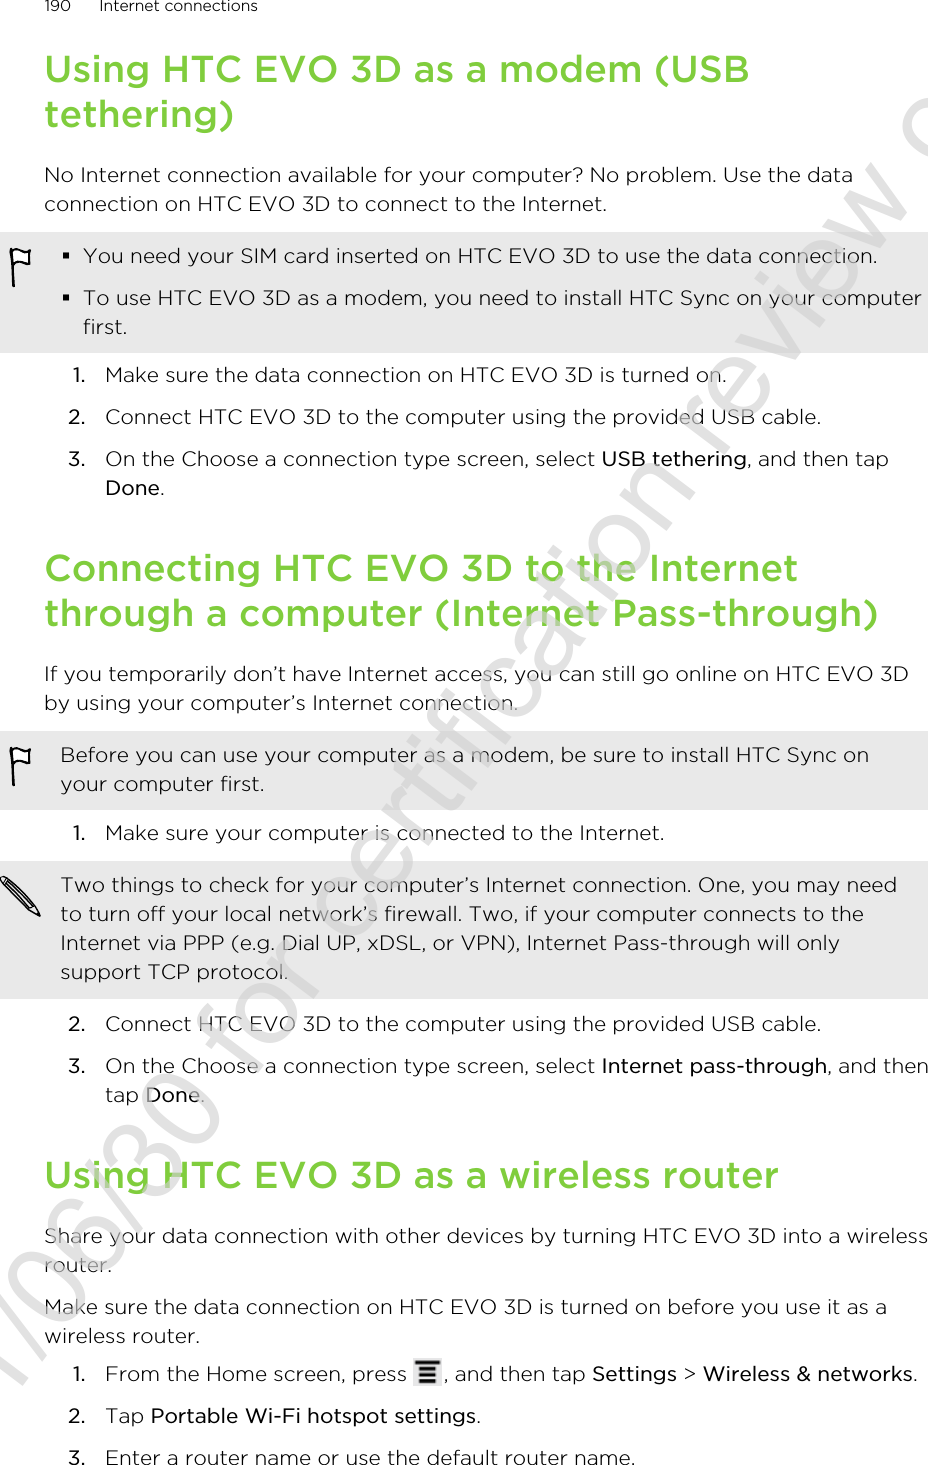 Using HTC EVO 3D as a modem (USBtethering)No Internet connection available for your computer? No problem. Use the dataconnection on HTC EVO 3D to connect to the Internet.§You need your SIM card inserted on HTC EVO 3D to use the data connection.§To use HTC EVO 3D as a modem, you need to install HTC Sync on your computerfirst.1. Make sure the data connection on HTC EVO 3D is turned on.2. Connect HTC EVO 3D to the computer using the provided USB cable.3. On the Choose a connection type screen, select USB tethering, and then tapDone.Connecting HTC EVO 3D to the Internetthrough a computer (Internet Pass-through)If you temporarily don’t have Internet access, you can still go online on HTC EVO 3Dby using your computer’s Internet connection.Before you can use your computer as a modem, be sure to install HTC Sync onyour computer first.1. Make sure your computer is connected to the Internet. Two things to check for your computer’s Internet connection. One, you may needto turn off your local network’s firewall. Two, if your computer connects to theInternet via PPP (e.g. Dial UP, xDSL, or VPN), Internet Pass-through will onlysupport TCP protocol.2. Connect HTC EVO 3D to the computer using the provided USB cable.3. On the Choose a connection type screen, select Internet pass-through, and thentap Done.Using HTC EVO 3D as a wireless routerShare your data connection with other devices by turning HTC EVO 3D into a wirelessrouter.Make sure the data connection on HTC EVO 3D is turned on before you use it as awireless router.1. From the Home screen, press  , and then tap Settings &gt; Wireless &amp; networks.2. Tap Portable Wi-Fi hotspot settings.3. Enter a router name or use the default router name.190 Internet connections2011/06/30 for certification review only